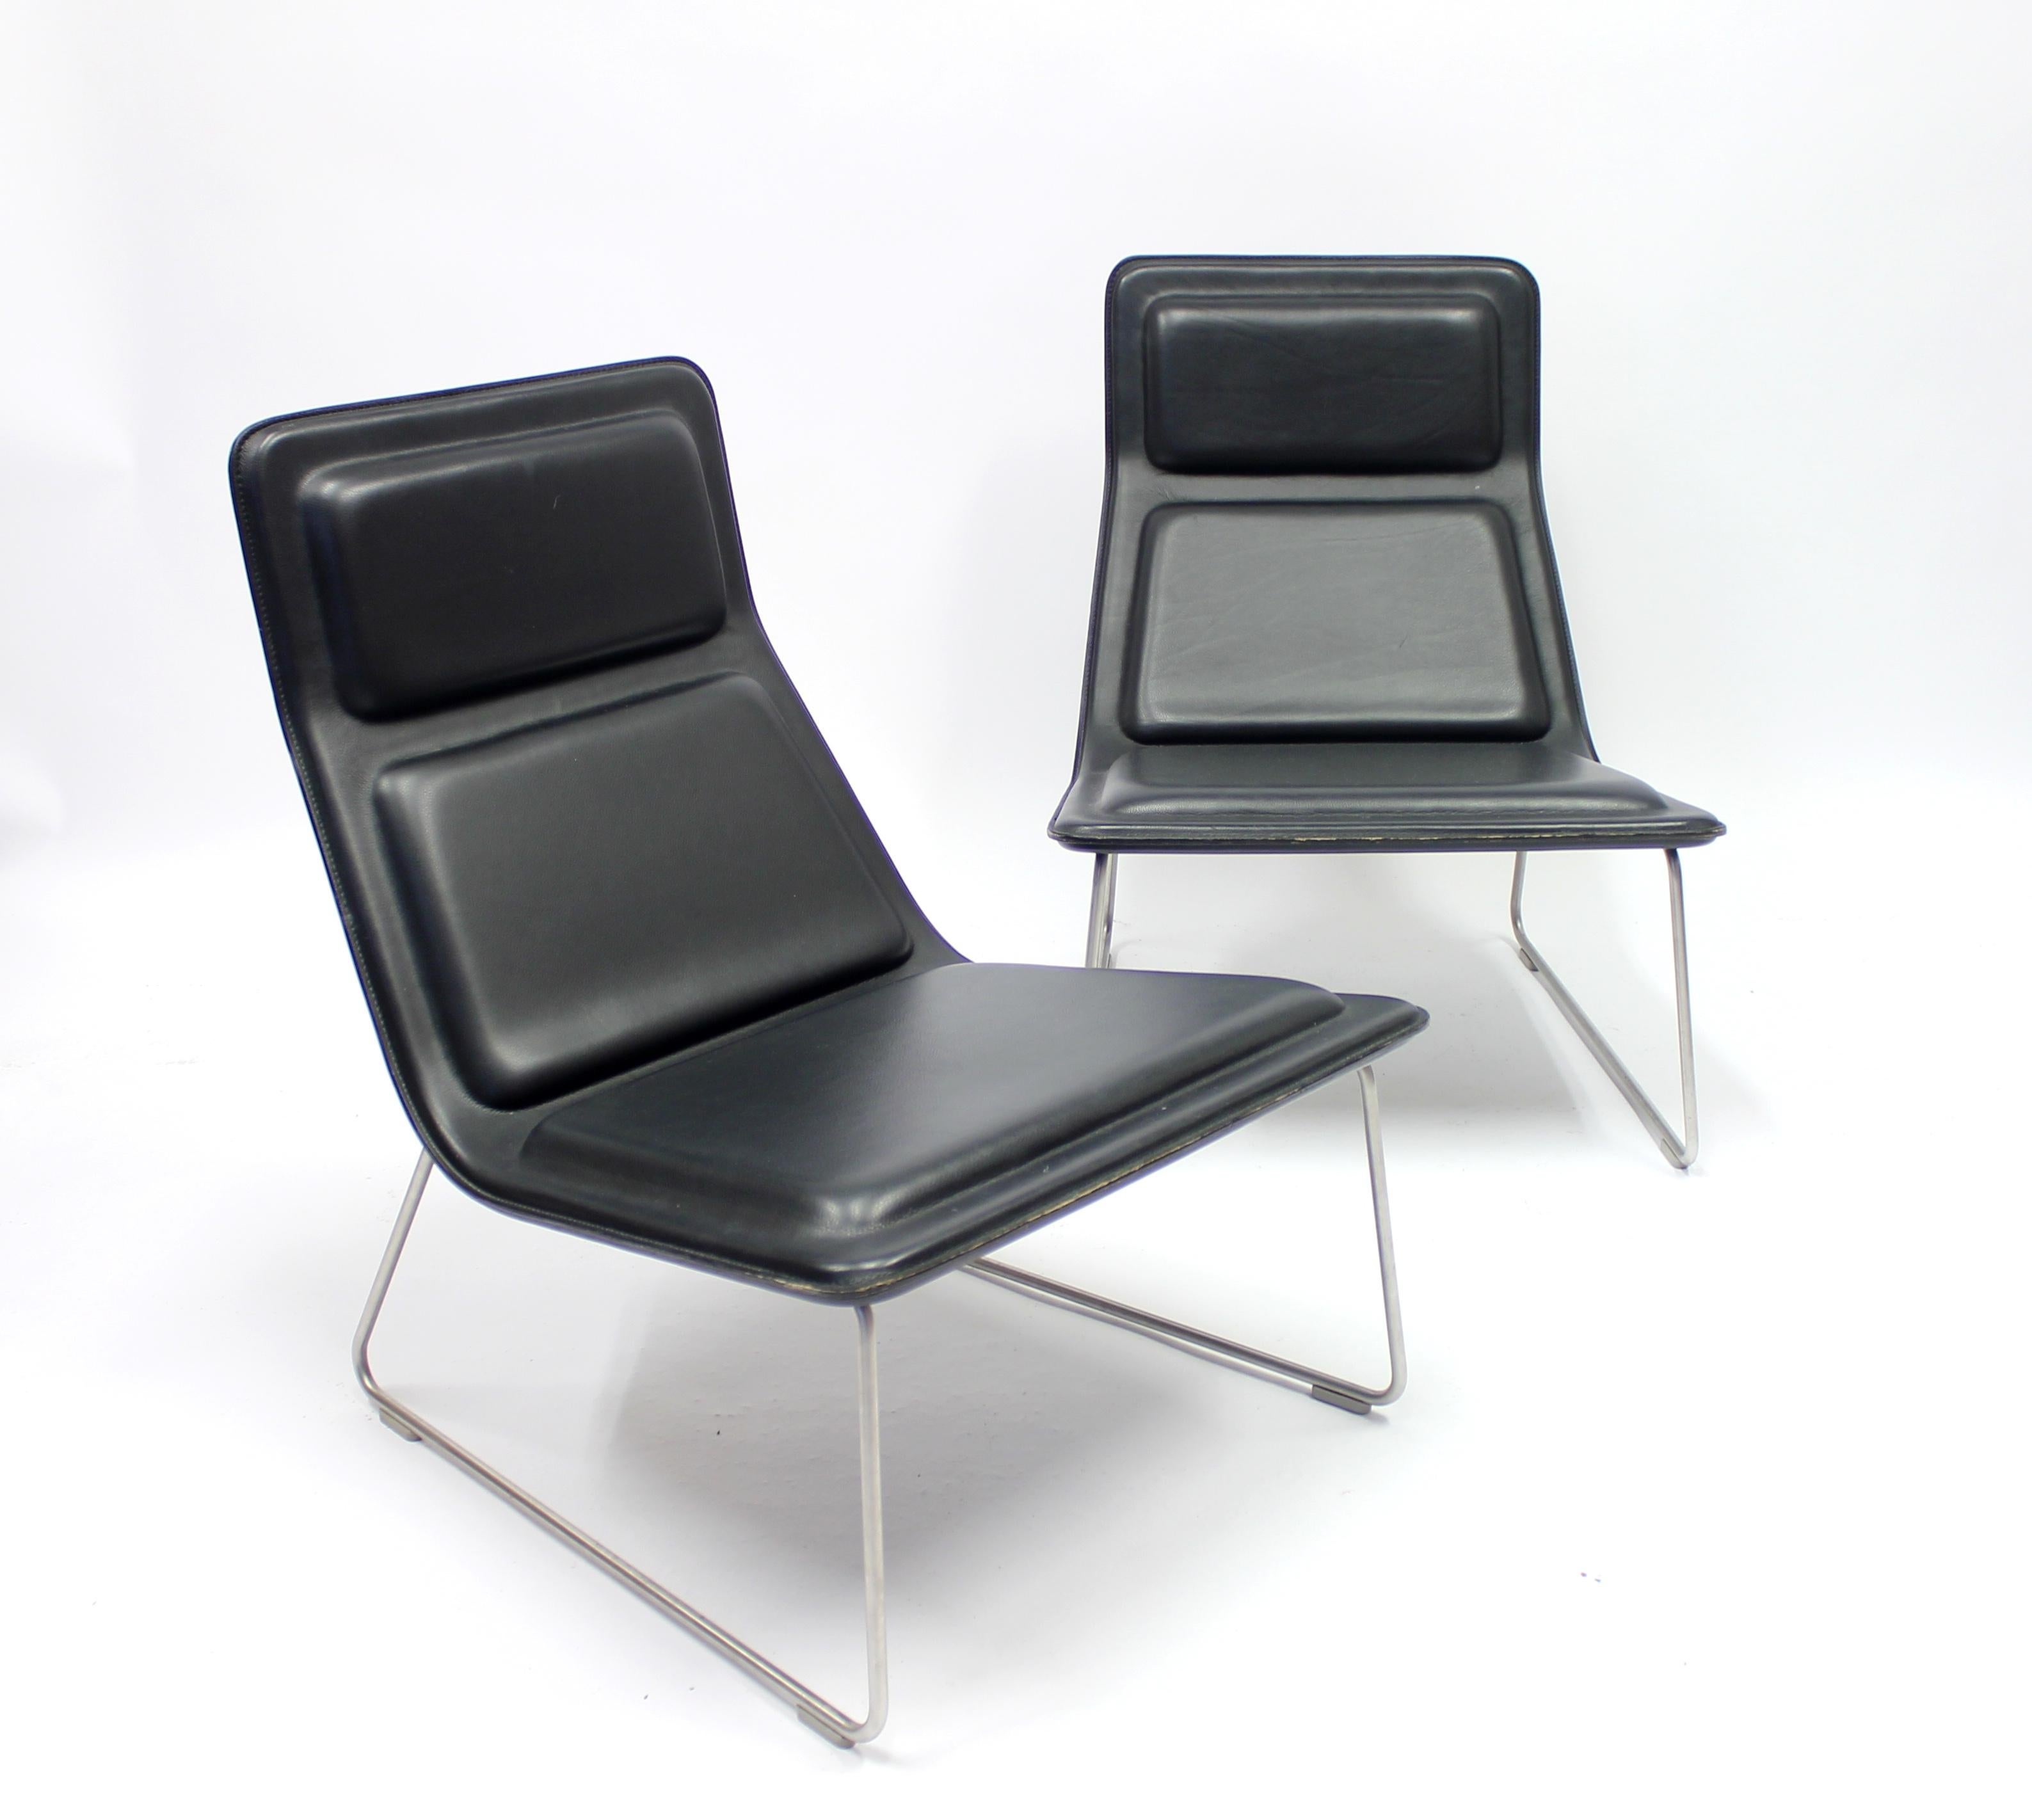 Pair of low pad easy chairs, designed by Jasper Morrison for Cappellini in 1999. Body in bent birch plywood, upholstered with multi-density polyurethane foam. Fixed cover in black leather. Frame is satin stainless steel, rubber feet. Morrison got